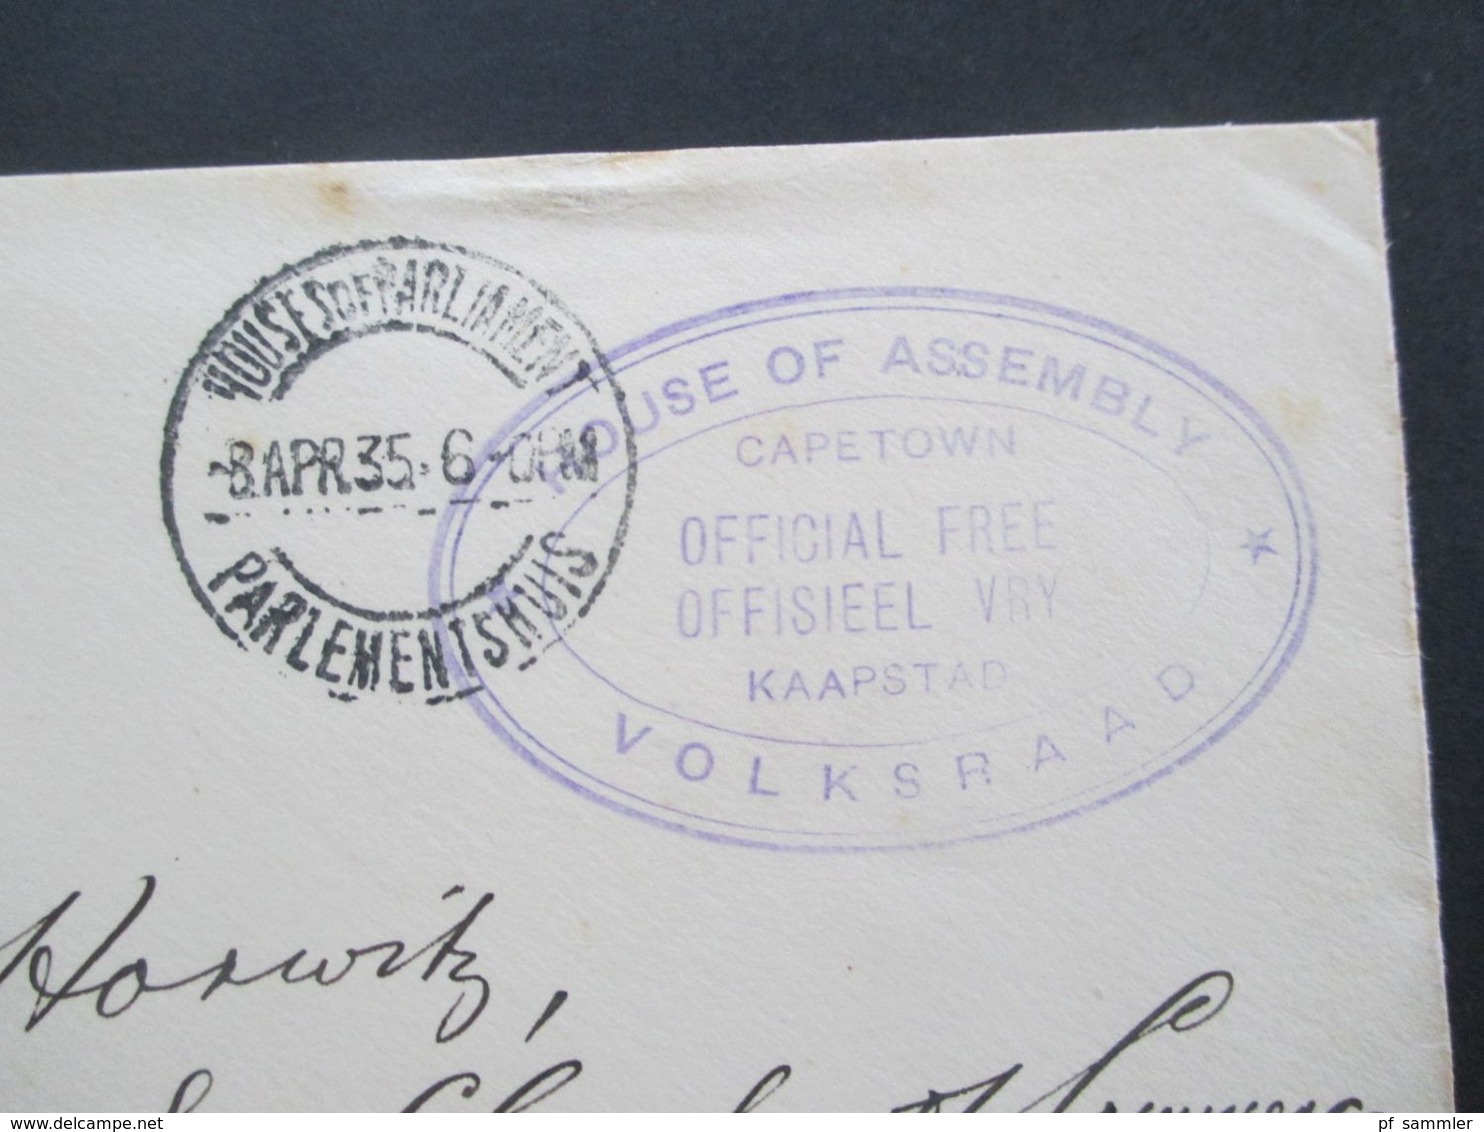 Südafrika 1935 Stempel Houeses Of Parliament Parliament Und House Of Assembly Volksraad Official Free Cape Town - Covers & Documents